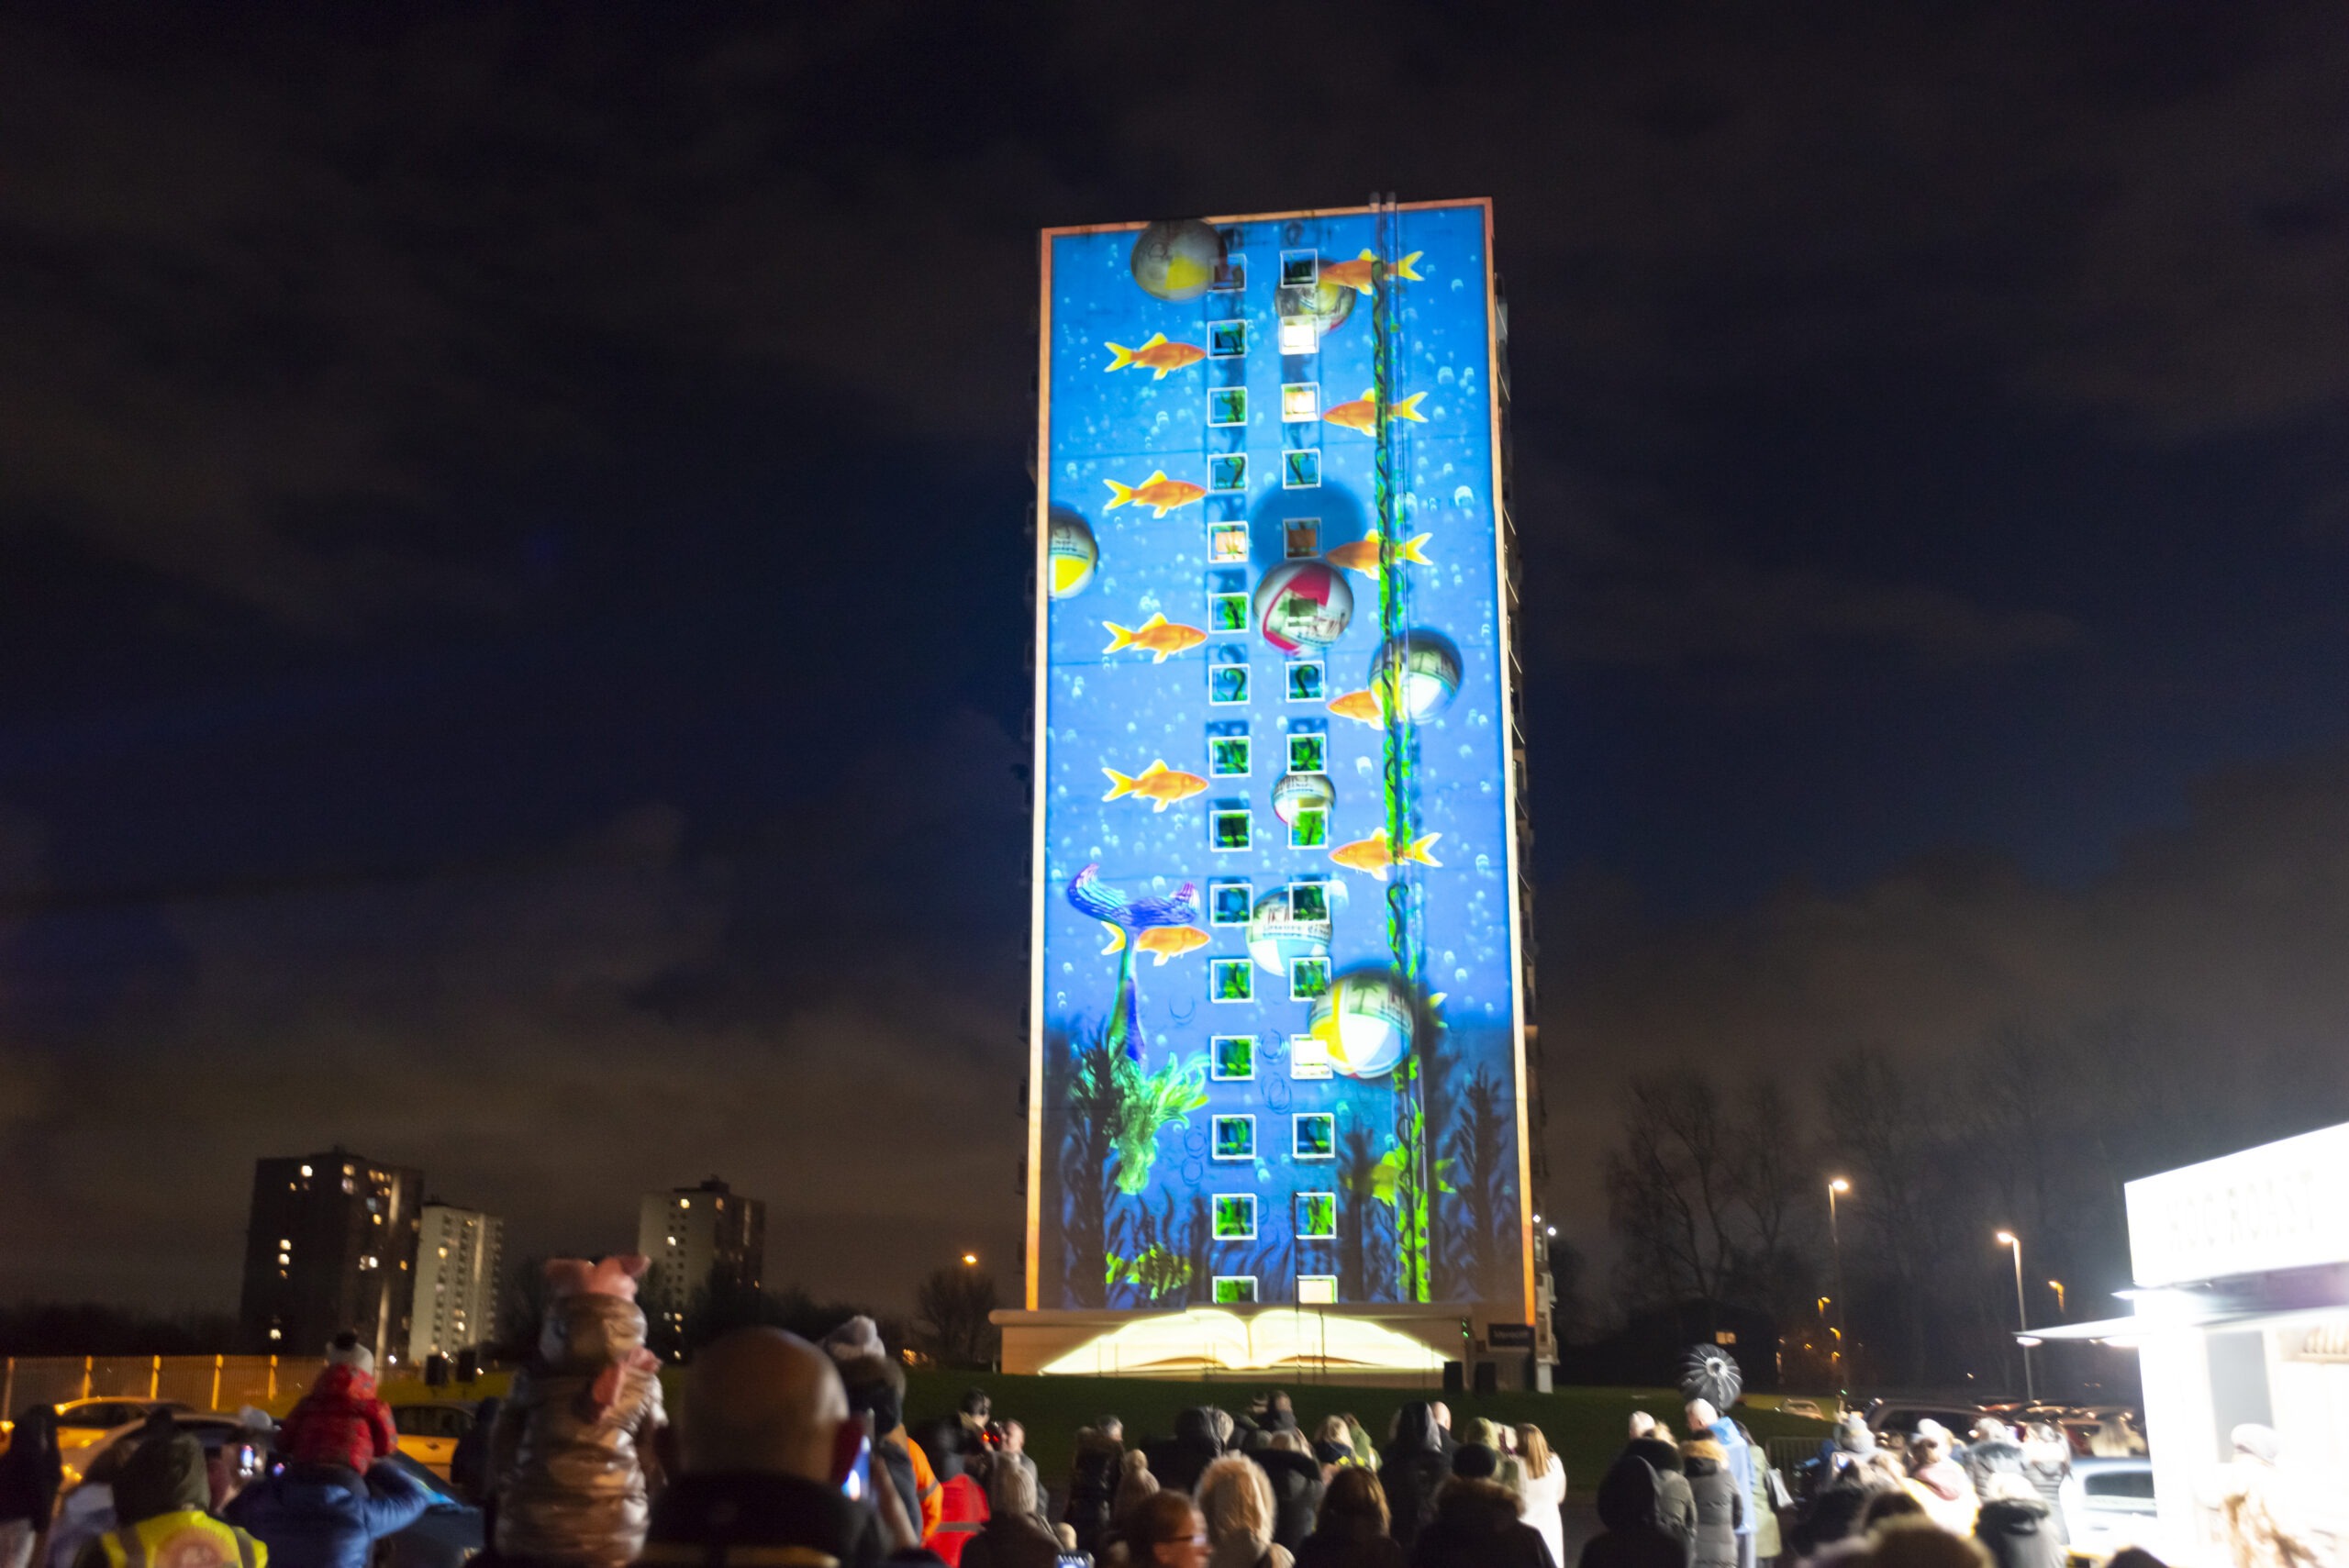 Stockbridge Village tenants see their memories, hopes and dreams come alive in atmospheric tower-block light show